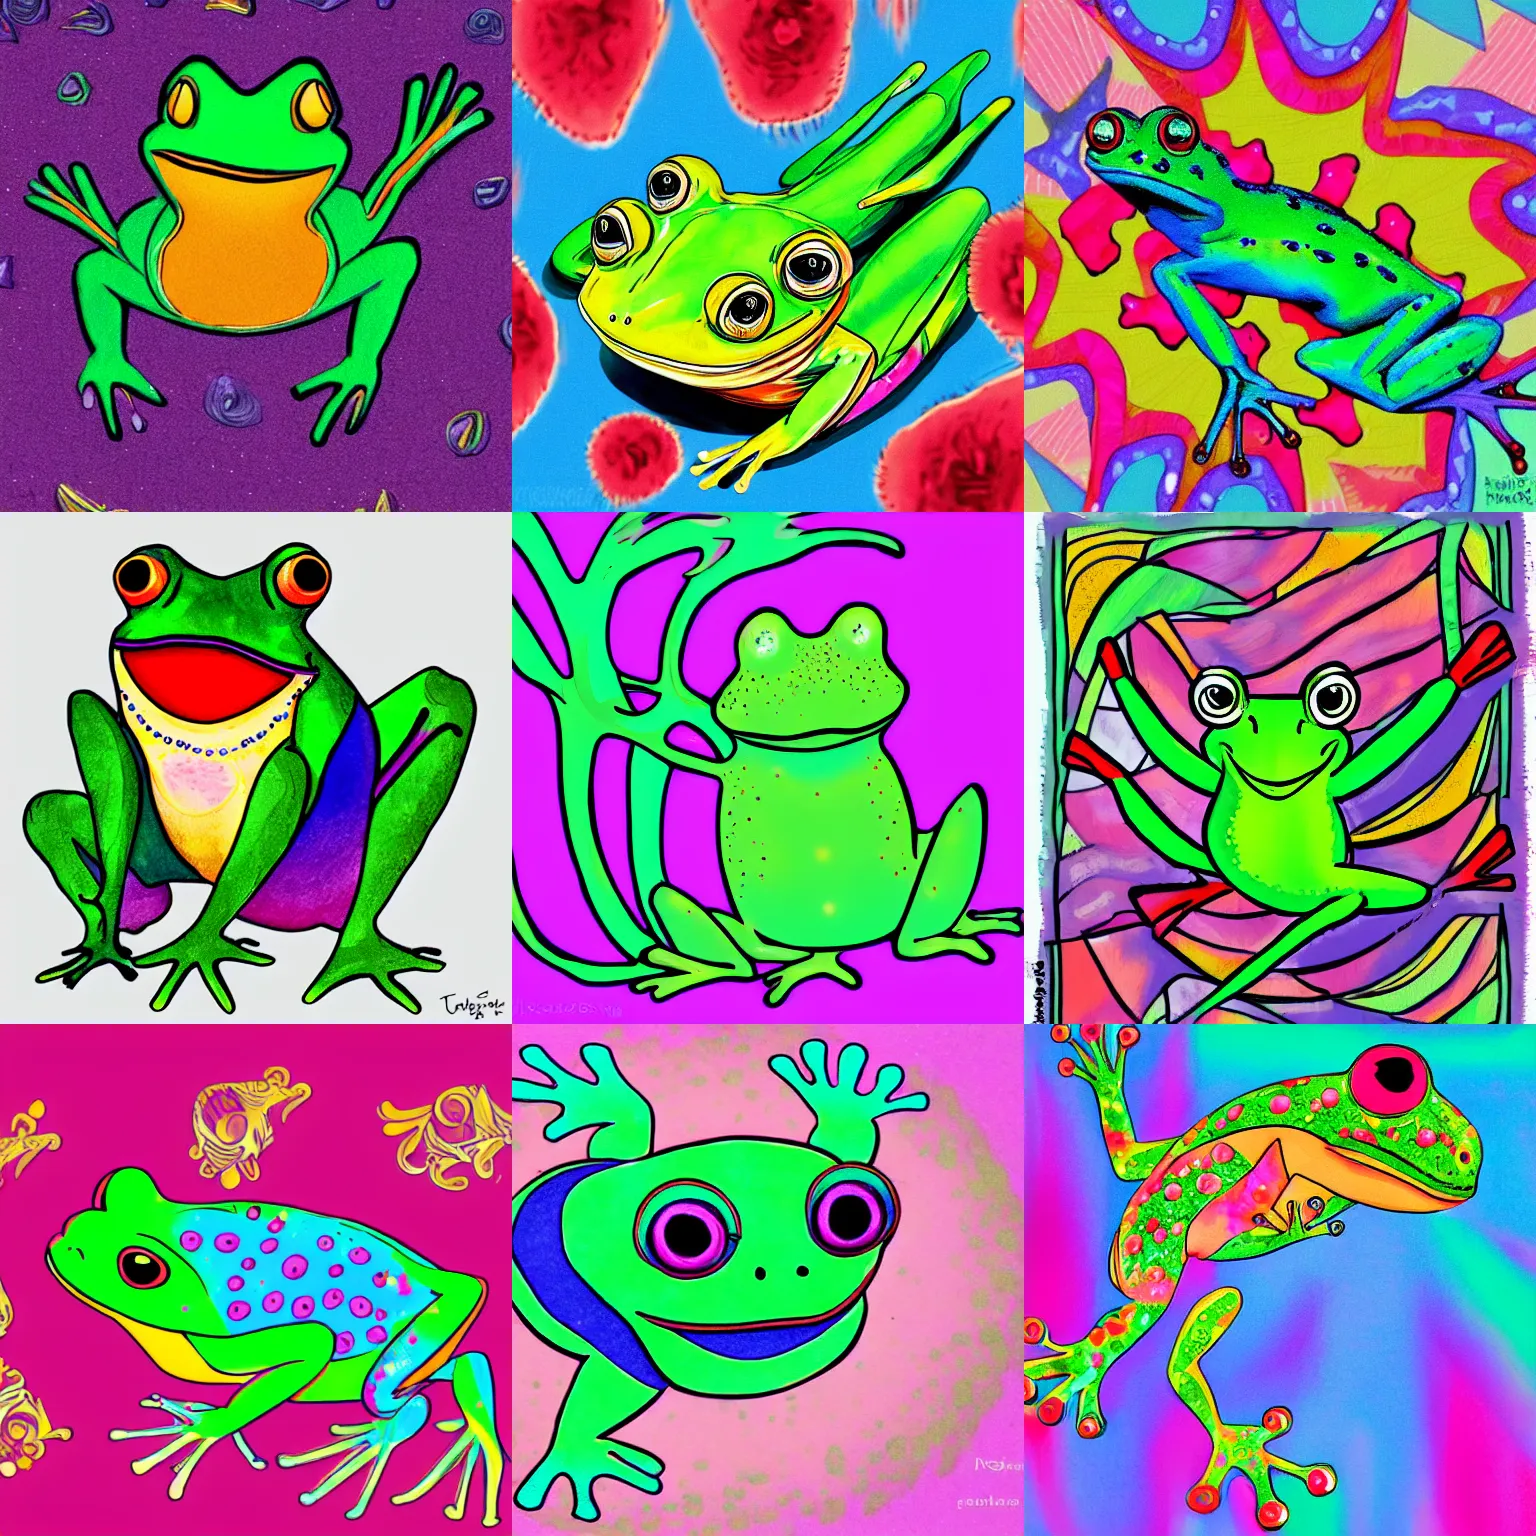 Prompt: a fancy dressed flamboyant whimsical frog, colorful illustration, emotions